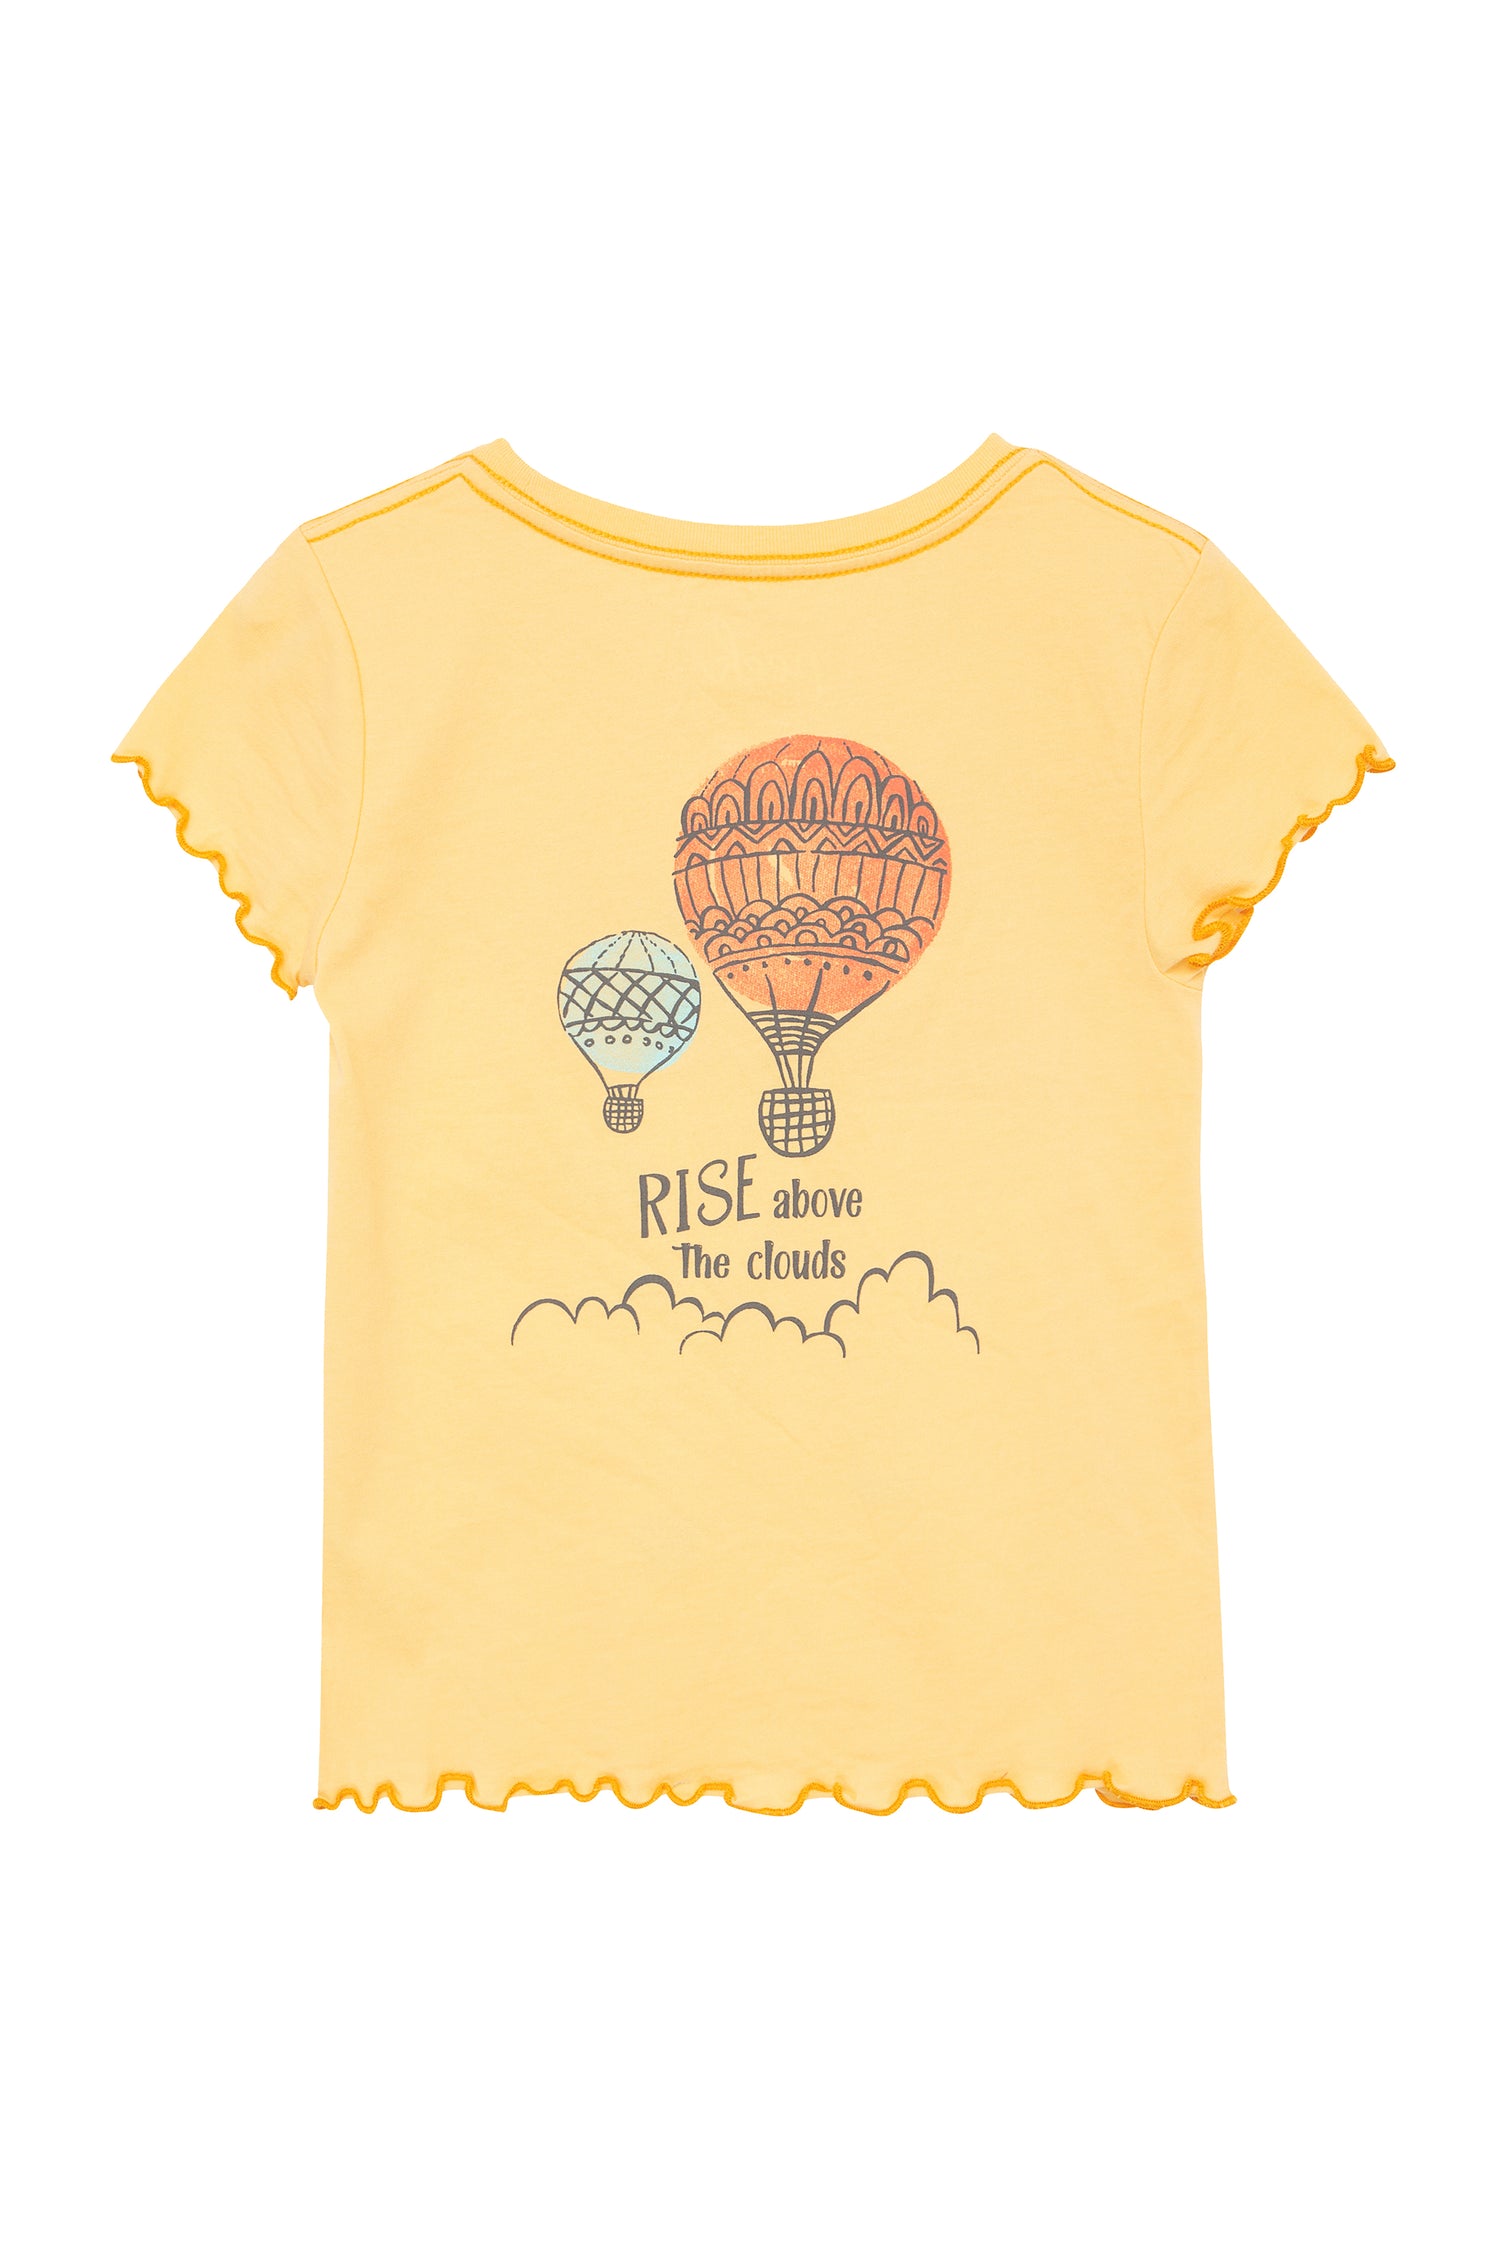 Back view of yellow shirt with hot air balloon image and "rise above the clouds" wording